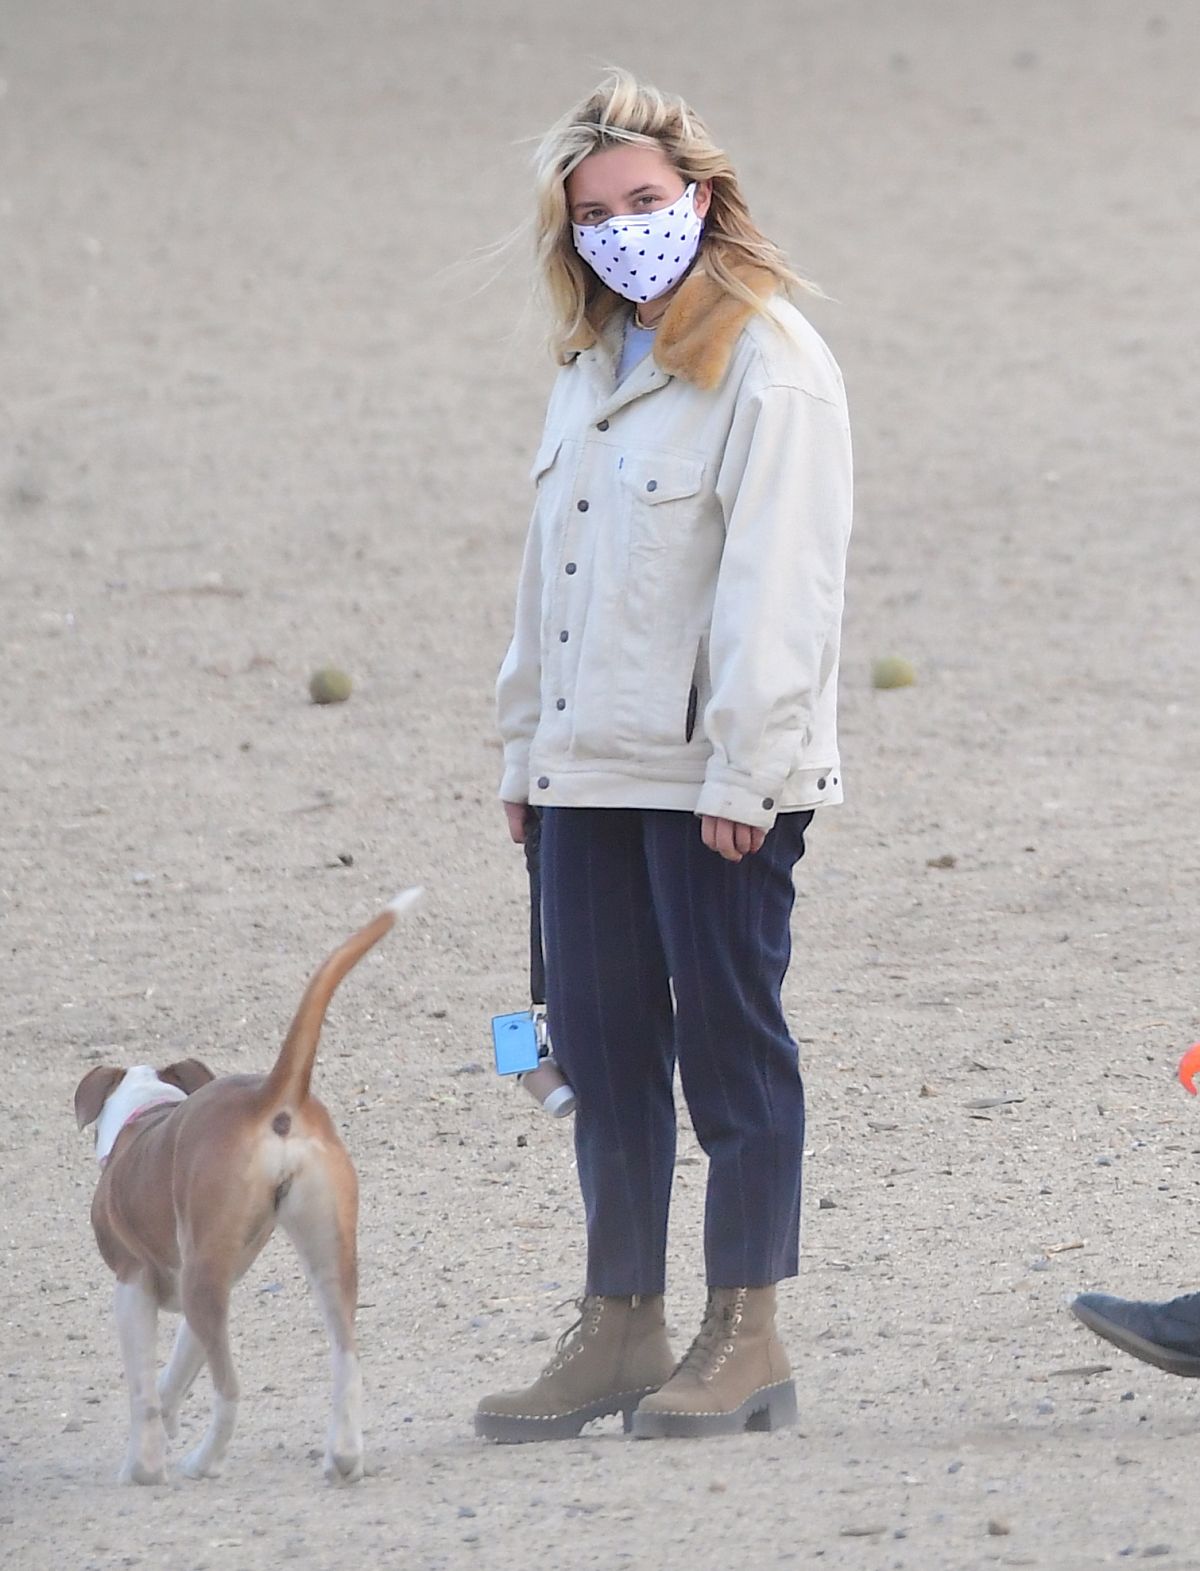 florence-pugh-out-with-her-dog-at-a-dog-park-in-los-angeles-12-14-2020-2.jpg